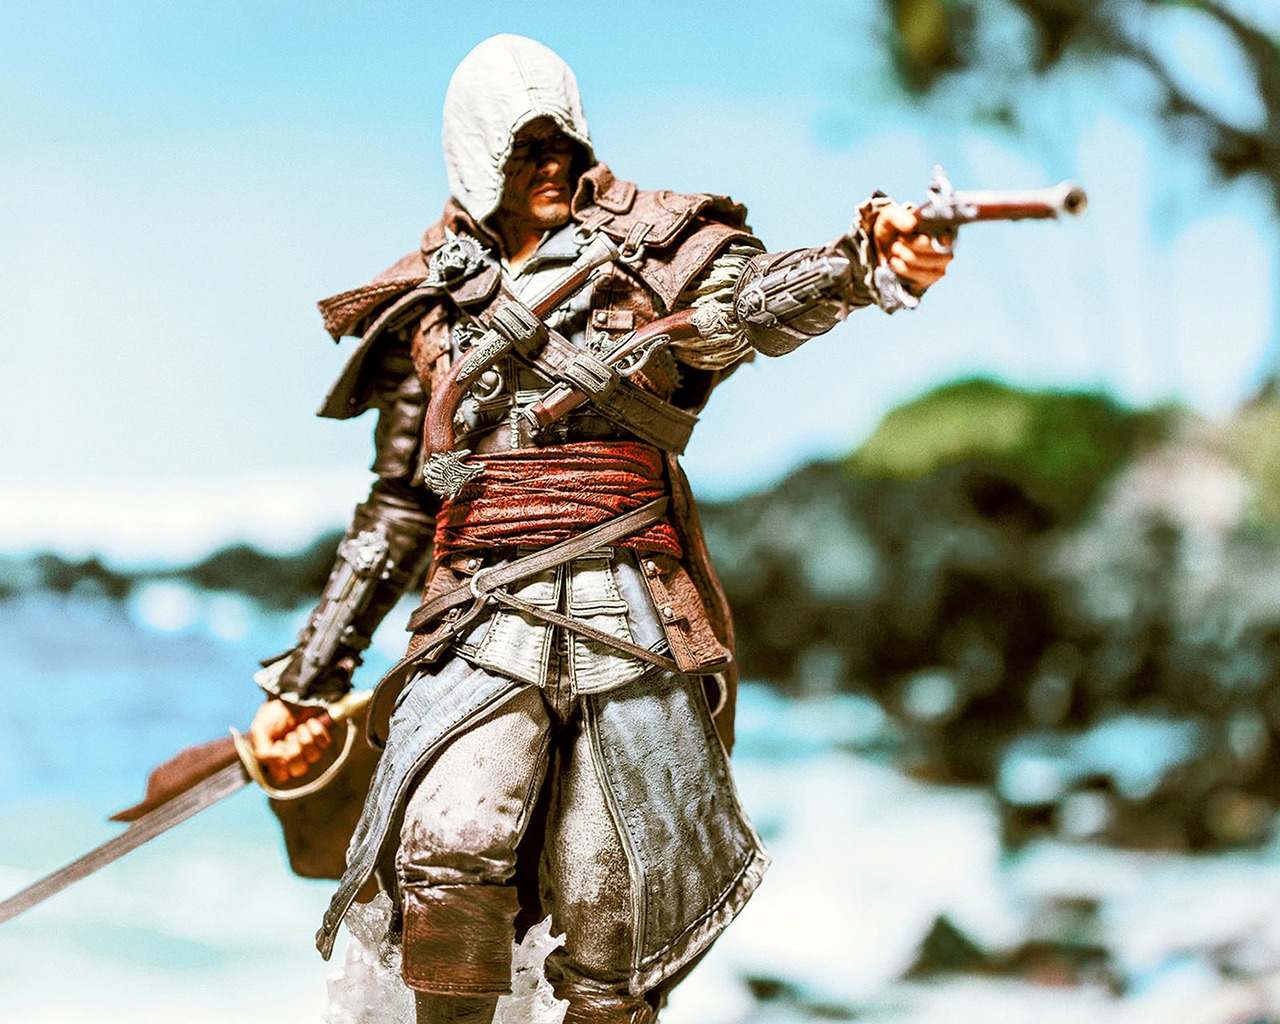 Assassin Creed Black Flag Character for 1280 x 1024 resolution